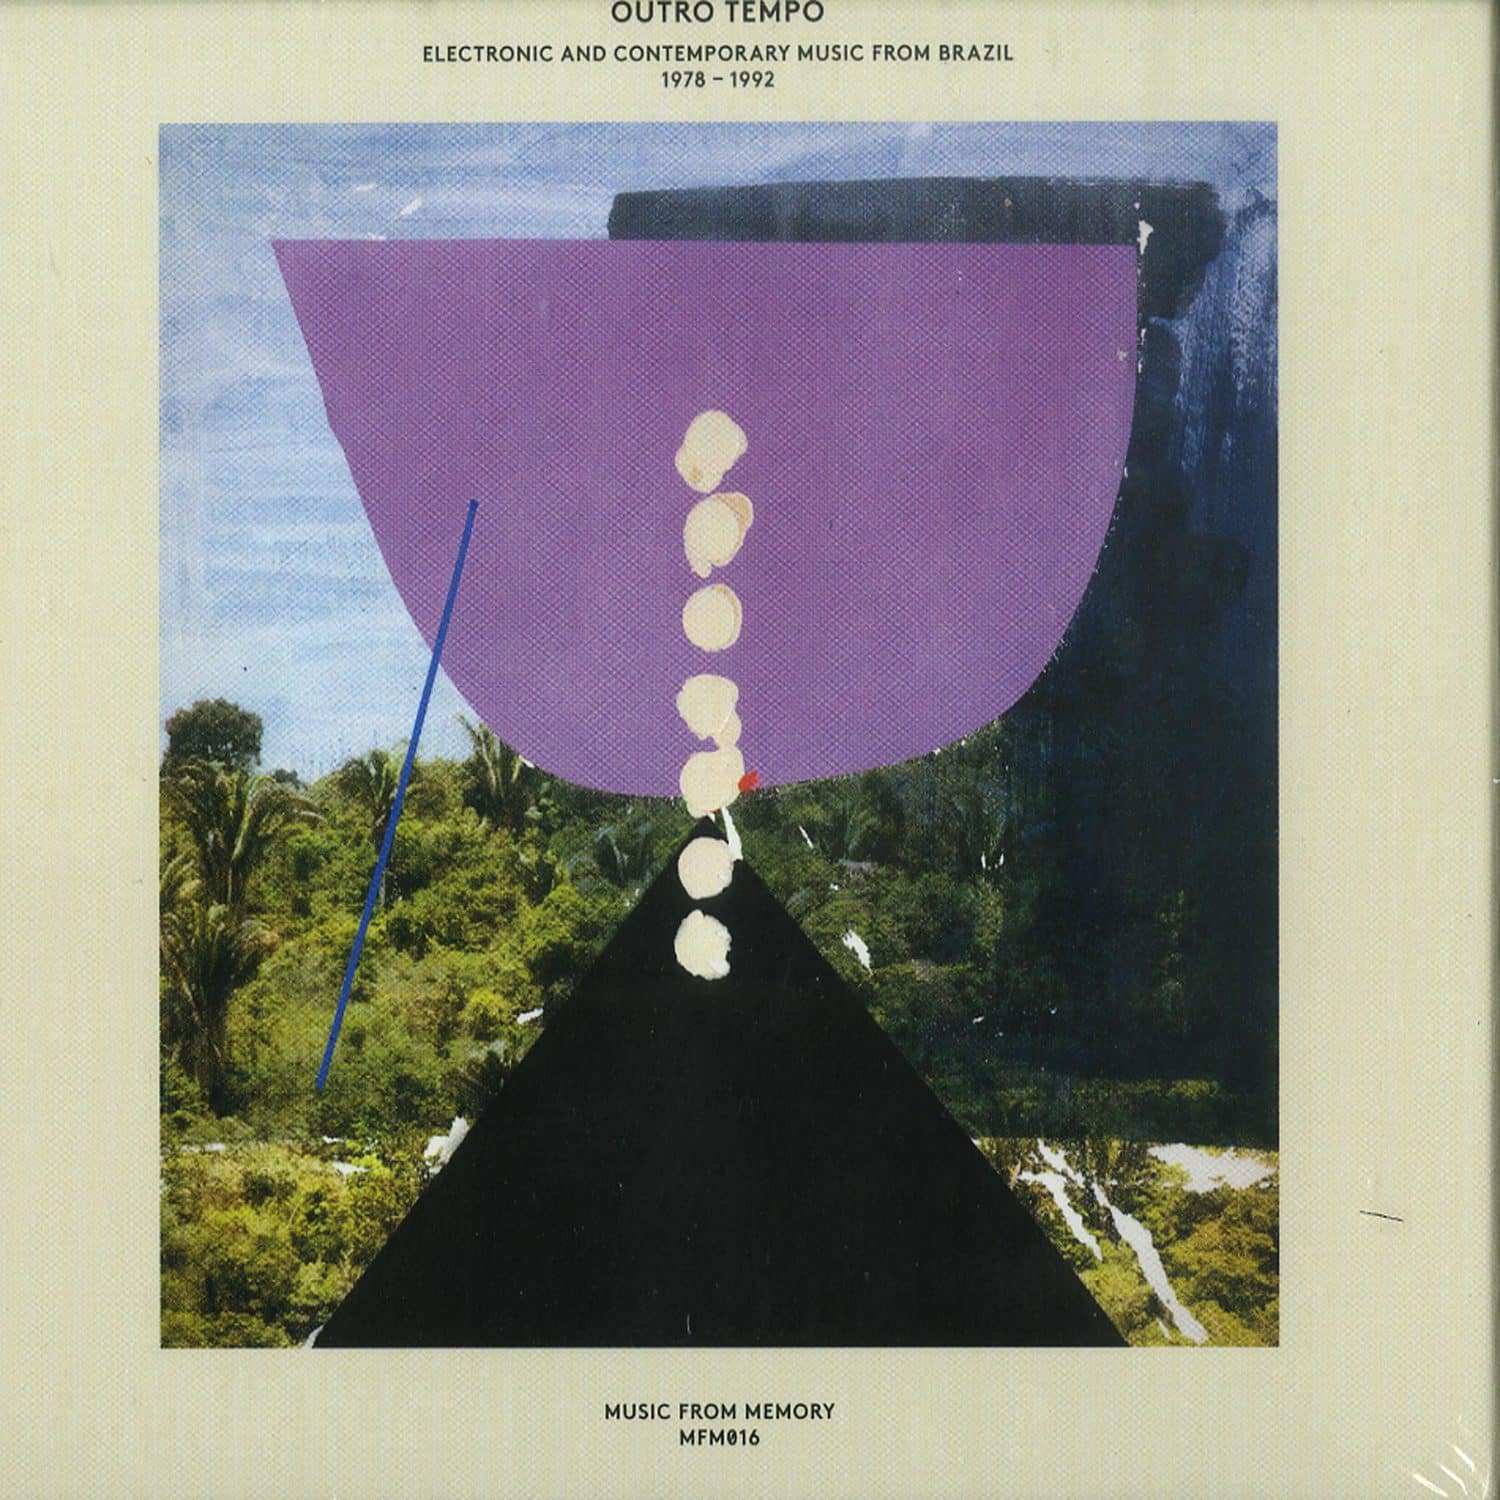 Various Artists - OUTRO TEMPO: ELECTRONIC AND CONTEMPORARY MUSIC FROM BRAZIL, 1978-1992 